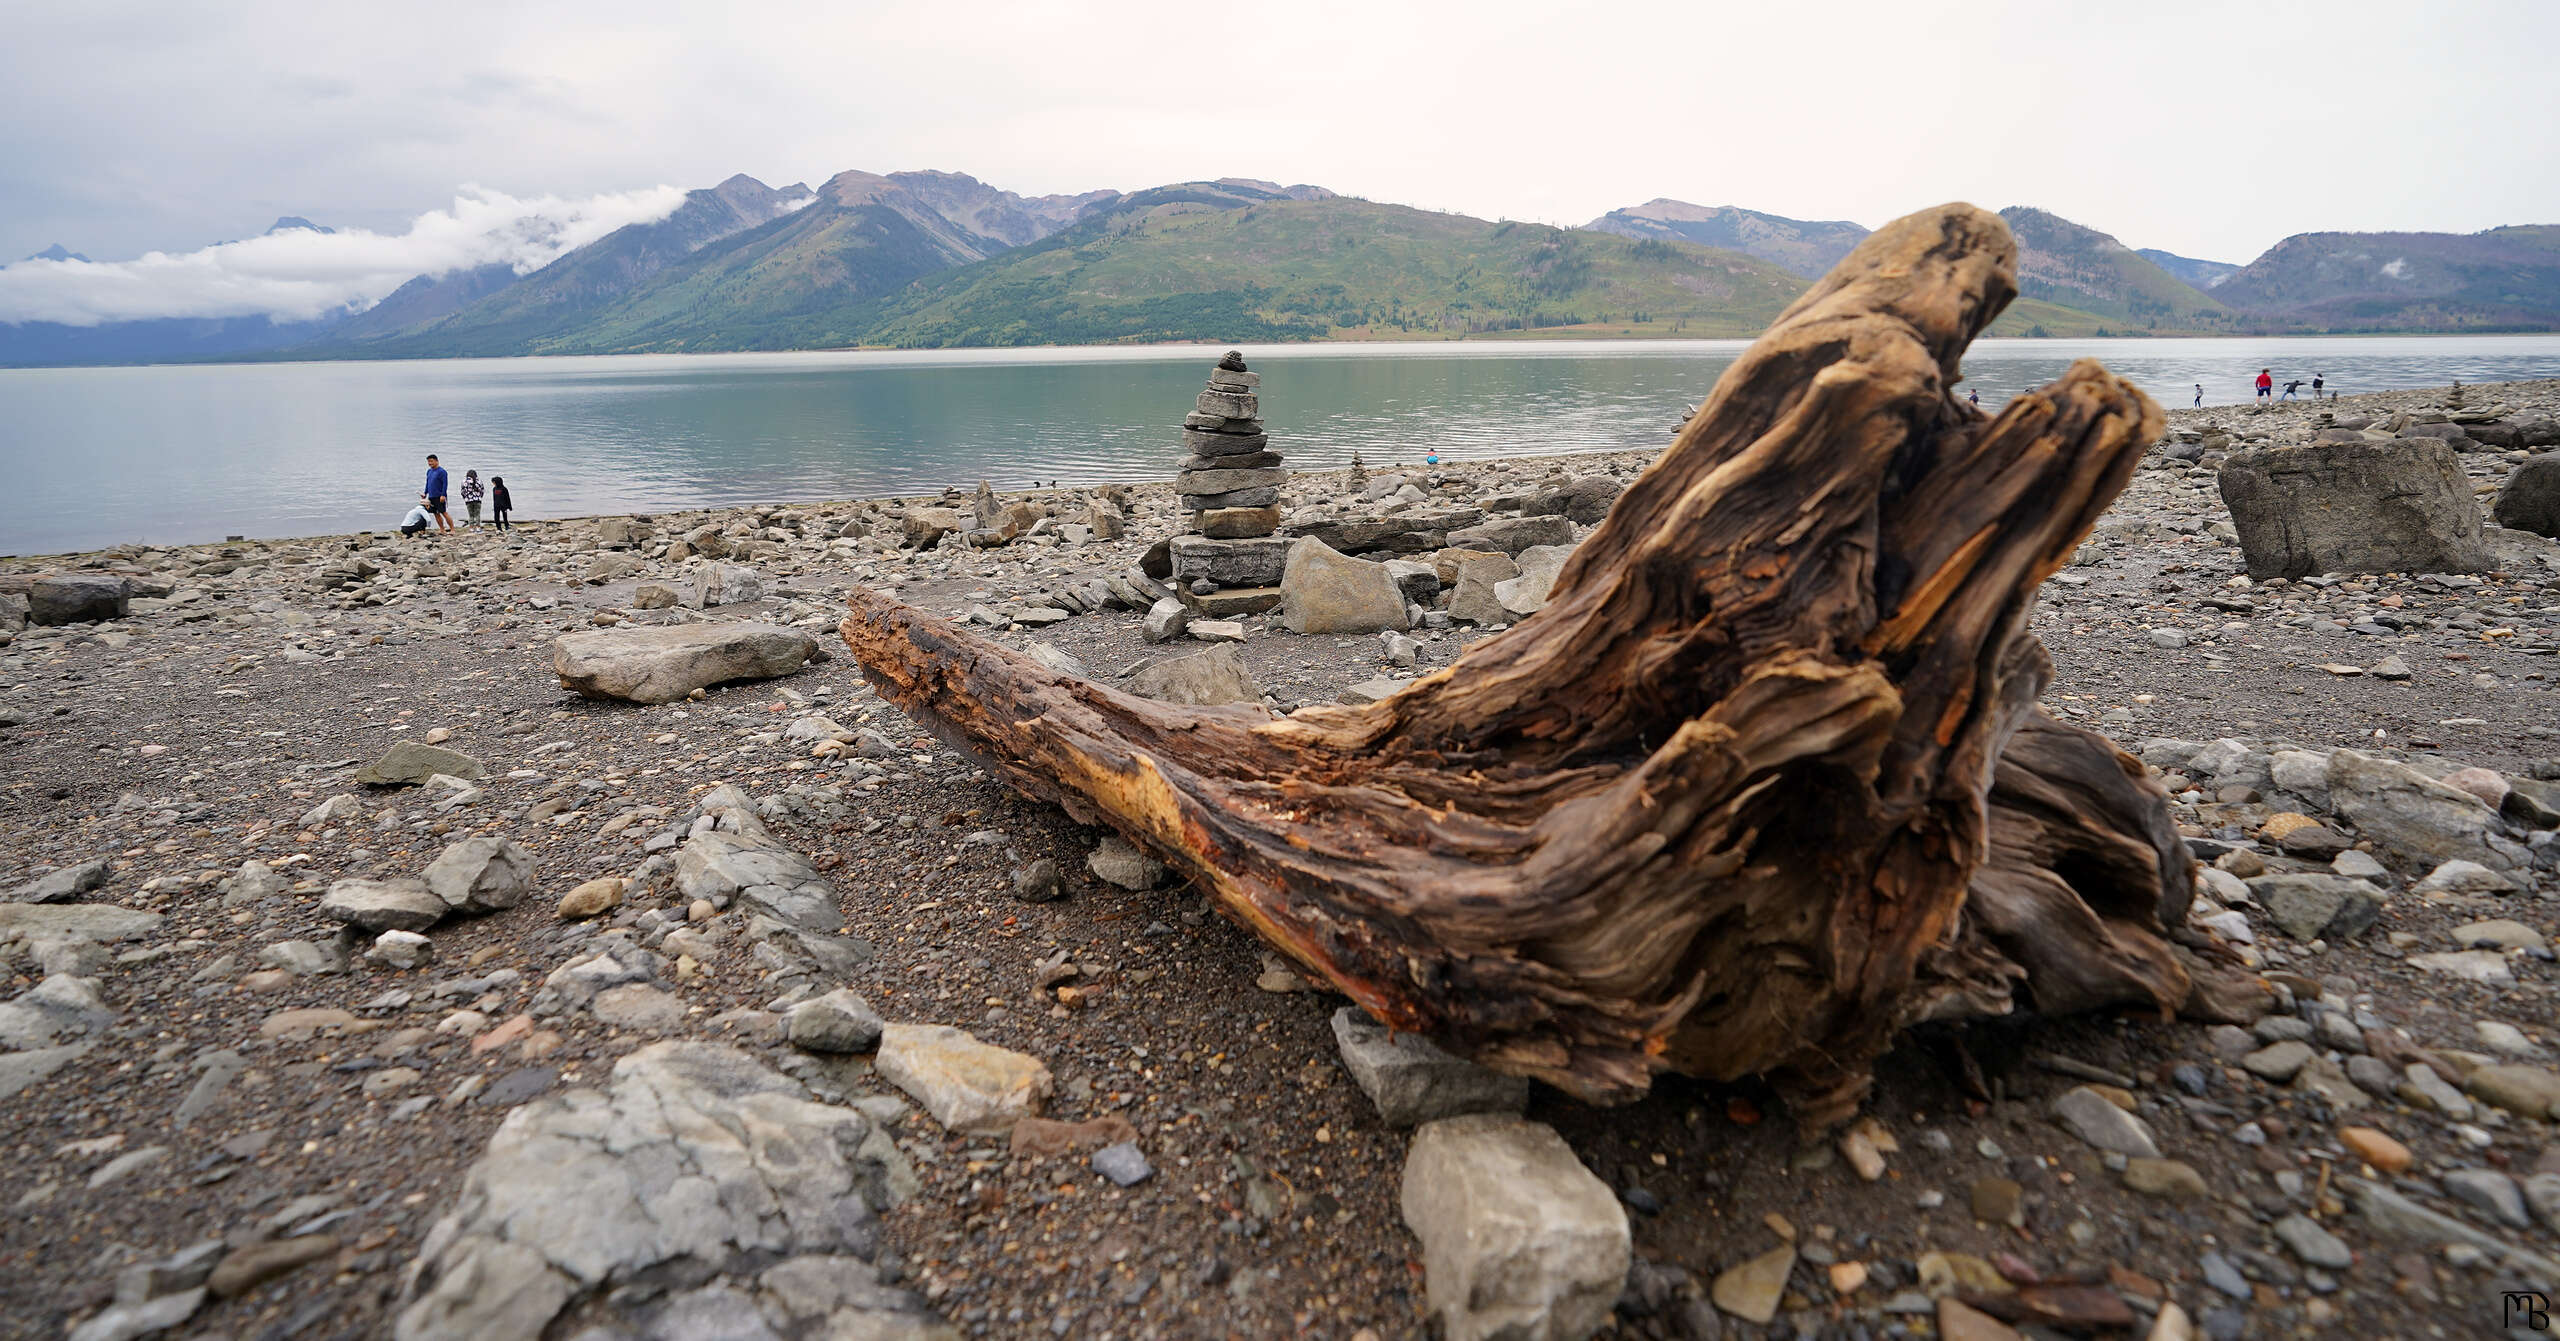 Driftwood and a rock tower in front of mountains